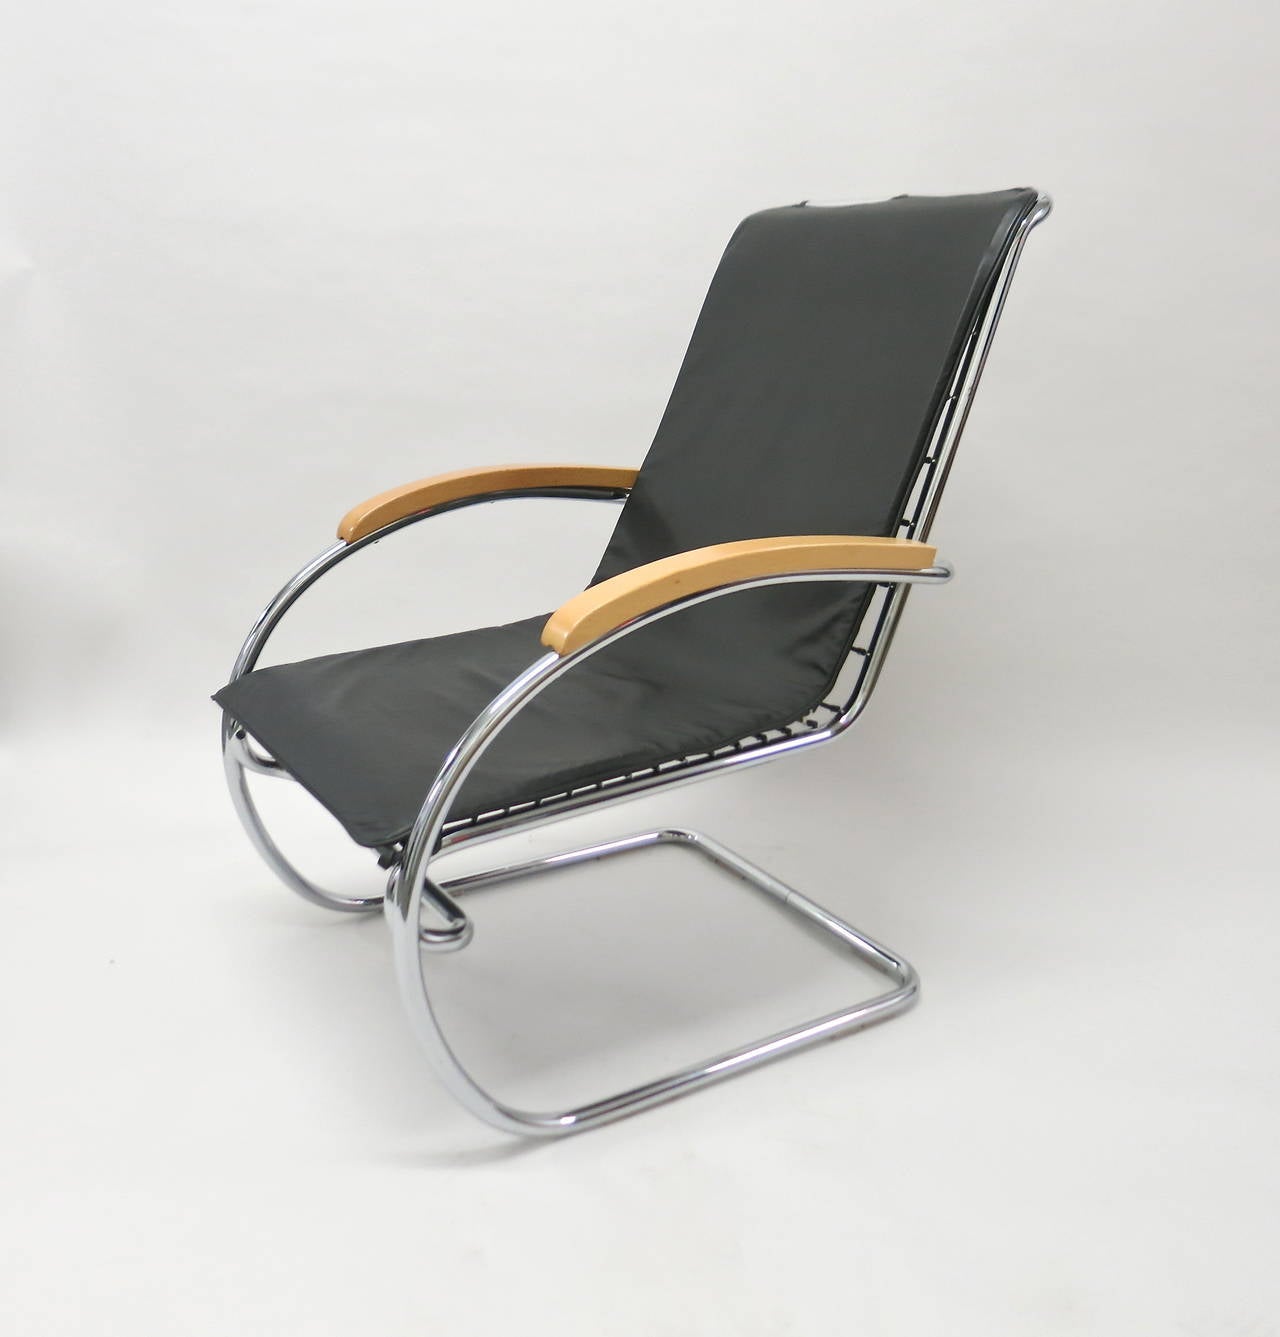 Pair of lounge chairs with chrome plated tubular steel frame, wood armrests and a single black leather cushion that attaches to the frame at top and bottom using leather ties sewn into the cushion. 
Anton Lorenz 1891-1964 originally designed the